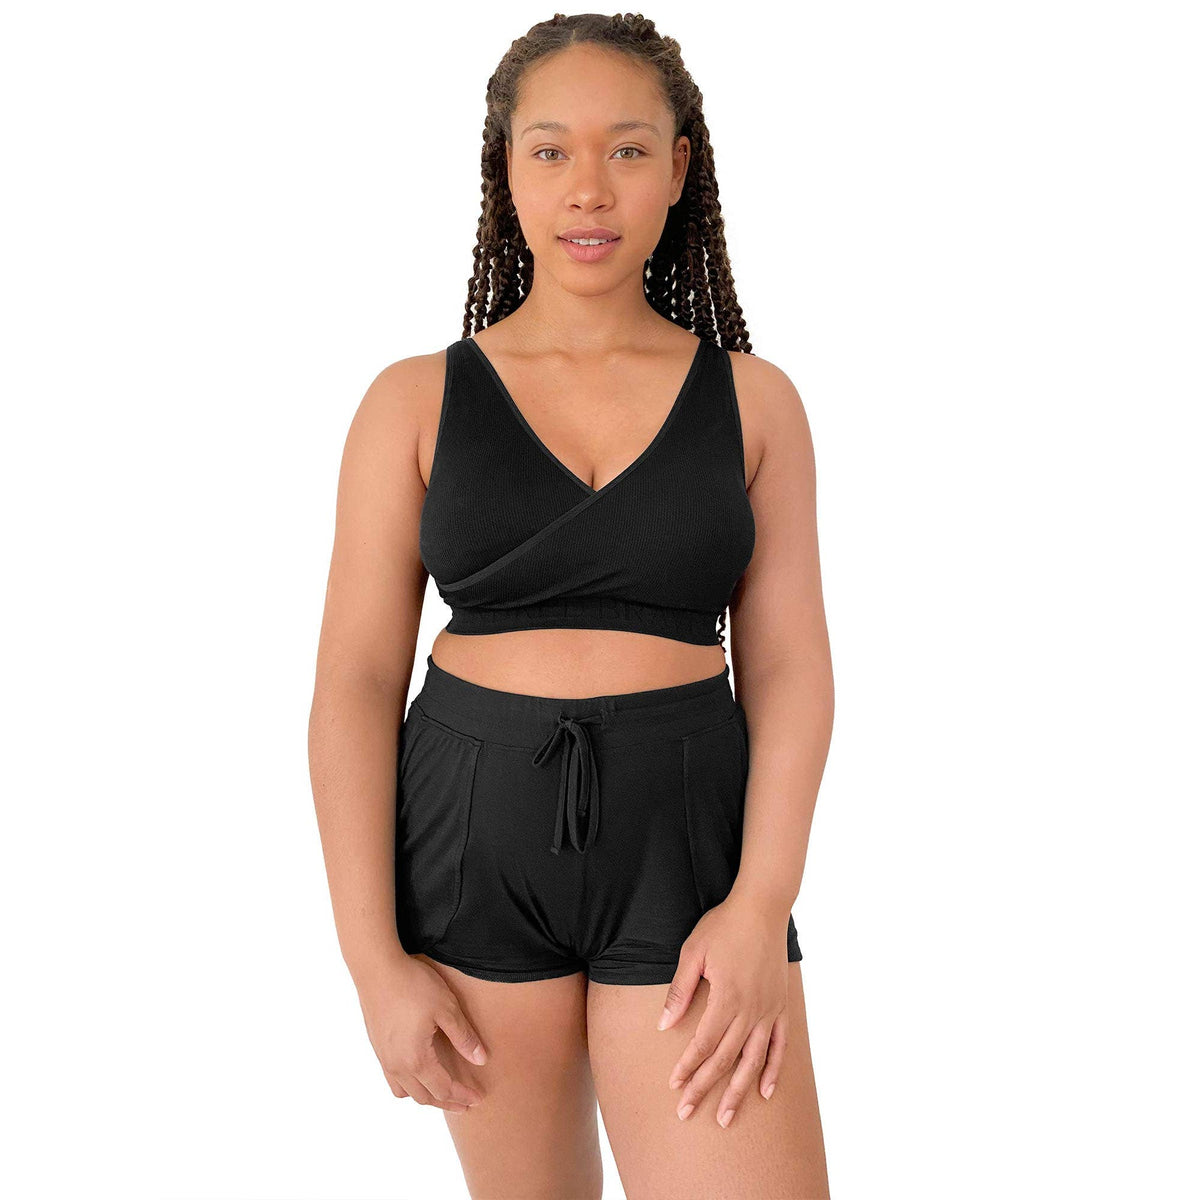 Buy Kindred Bravely Extra Soft Organic Cotton Busty Wireless